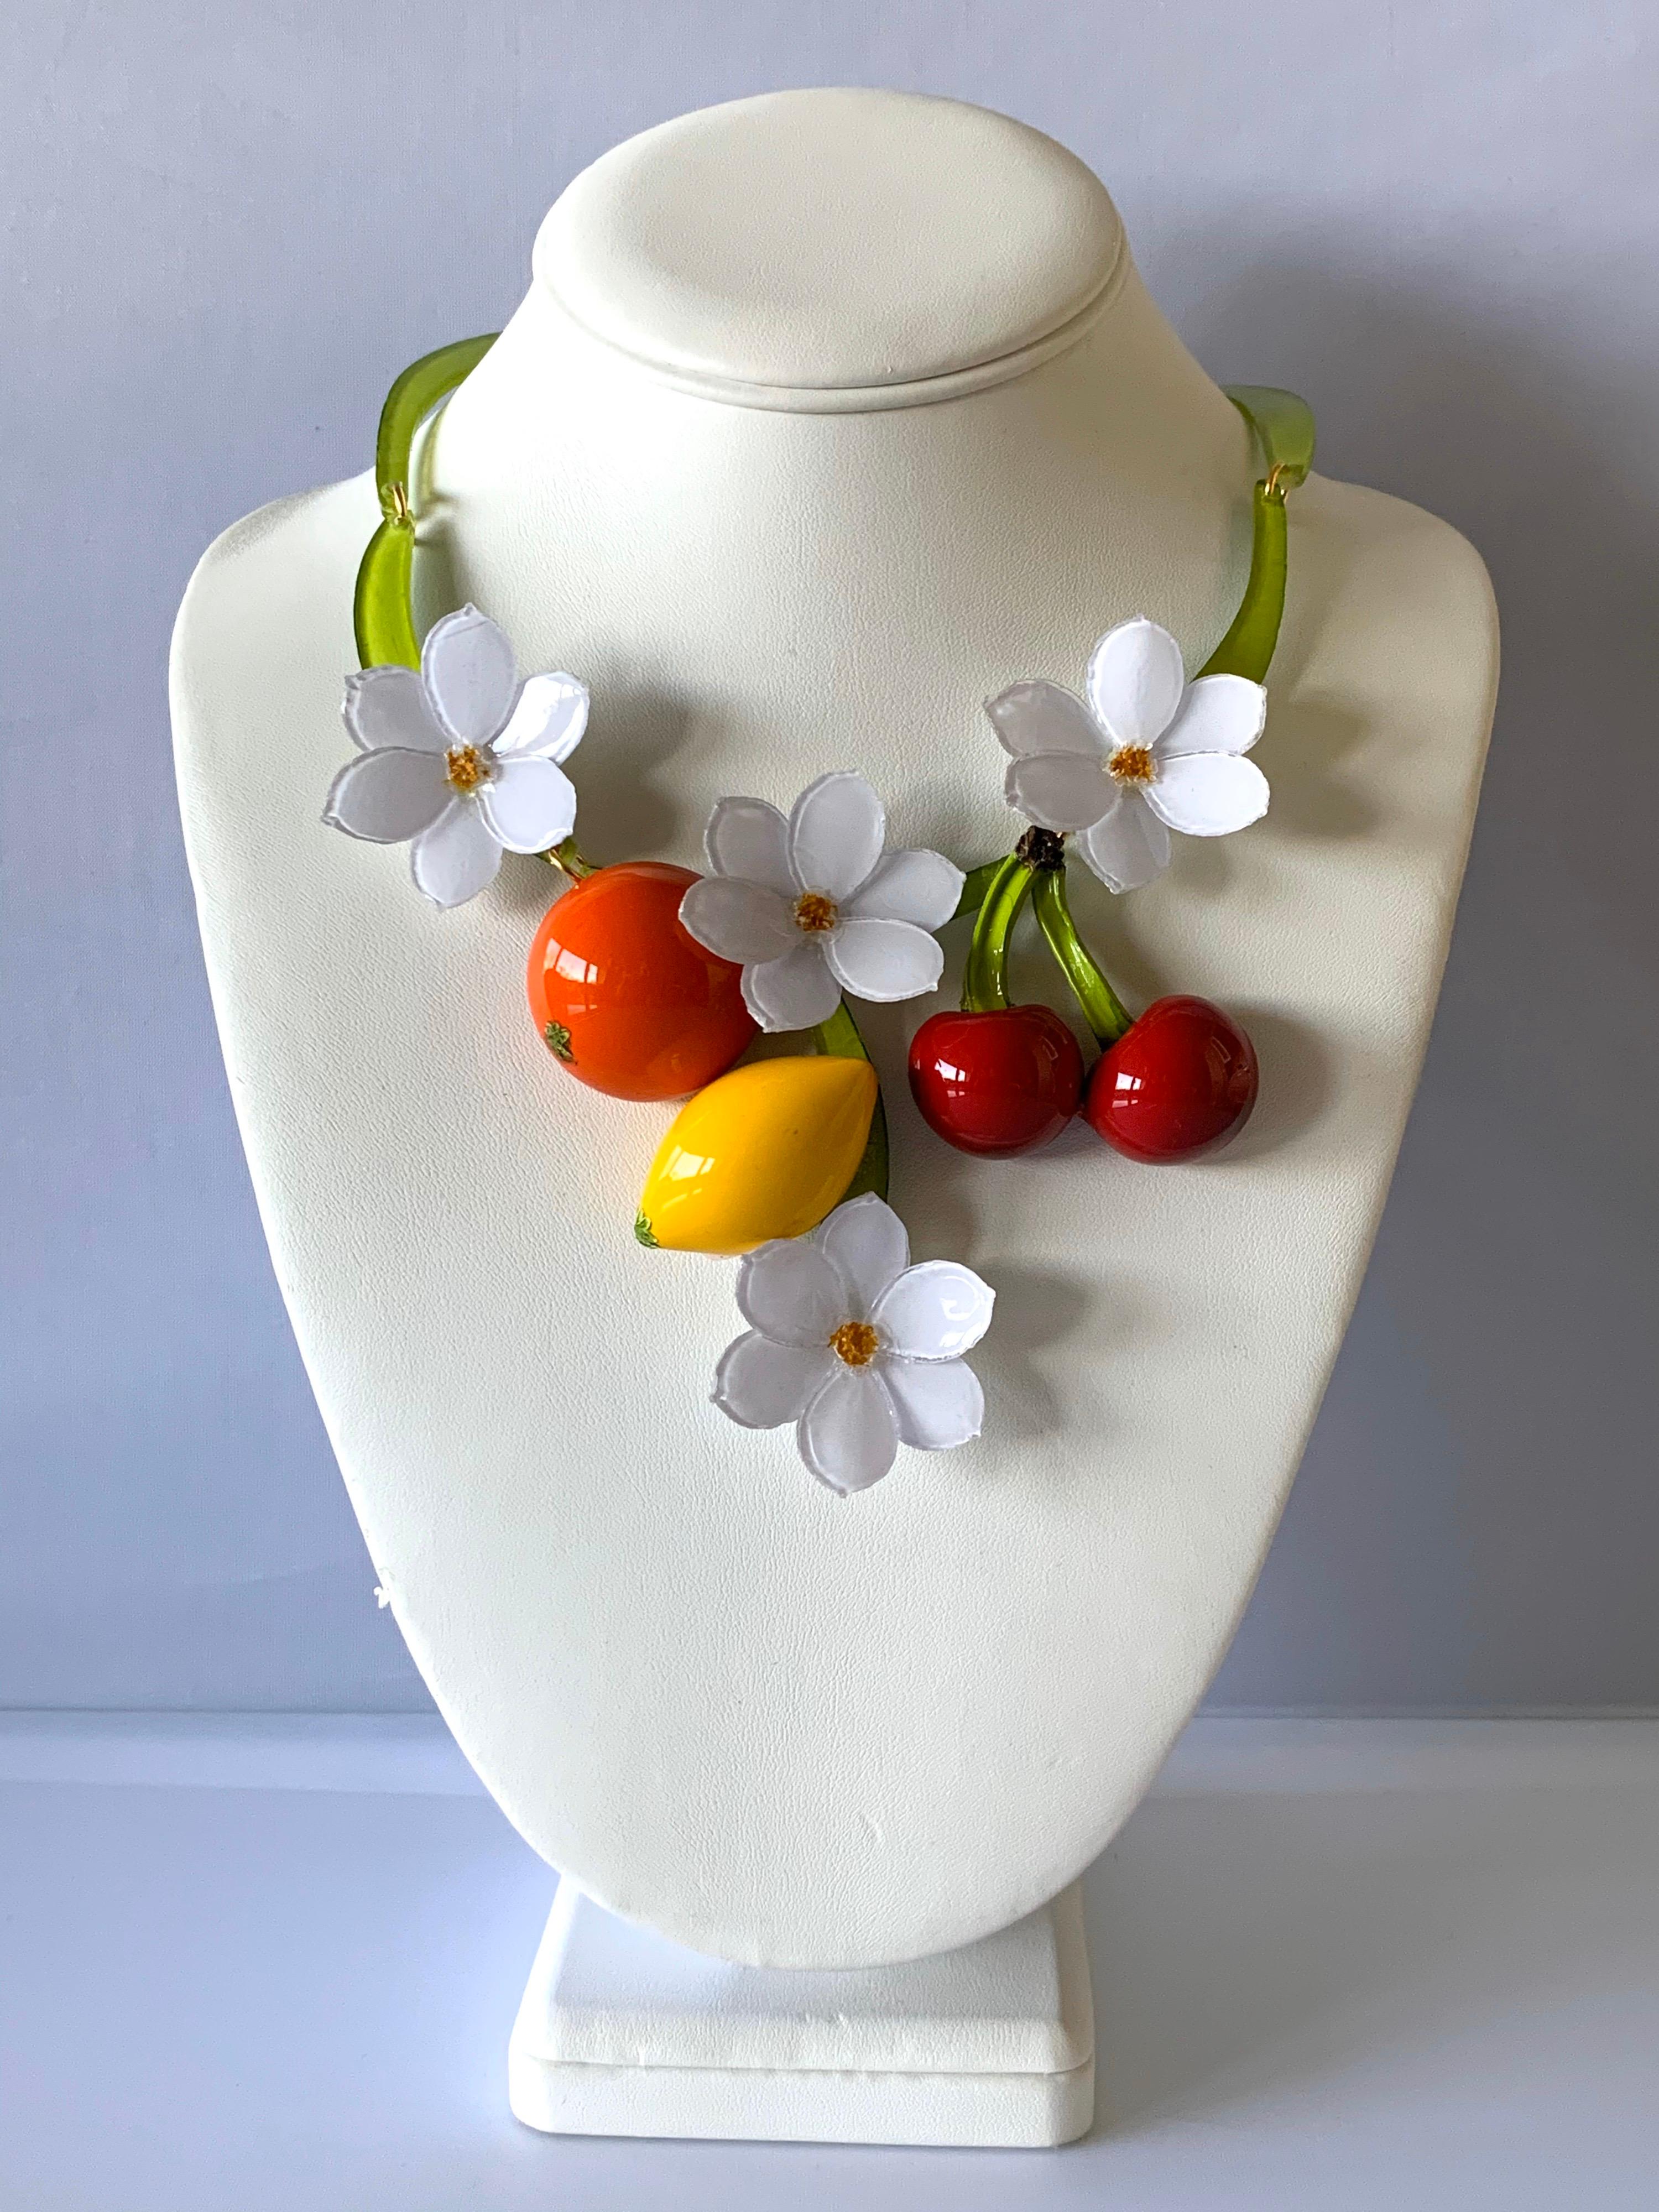 Light and easy to wear, the contemporary handmade adjustable artisanal necklace was crafted in Paris by Cilea. The statement necklace features three-dimensional fruit and white enameline (enamel and resin composite)  flowers. The cherry, orange, and